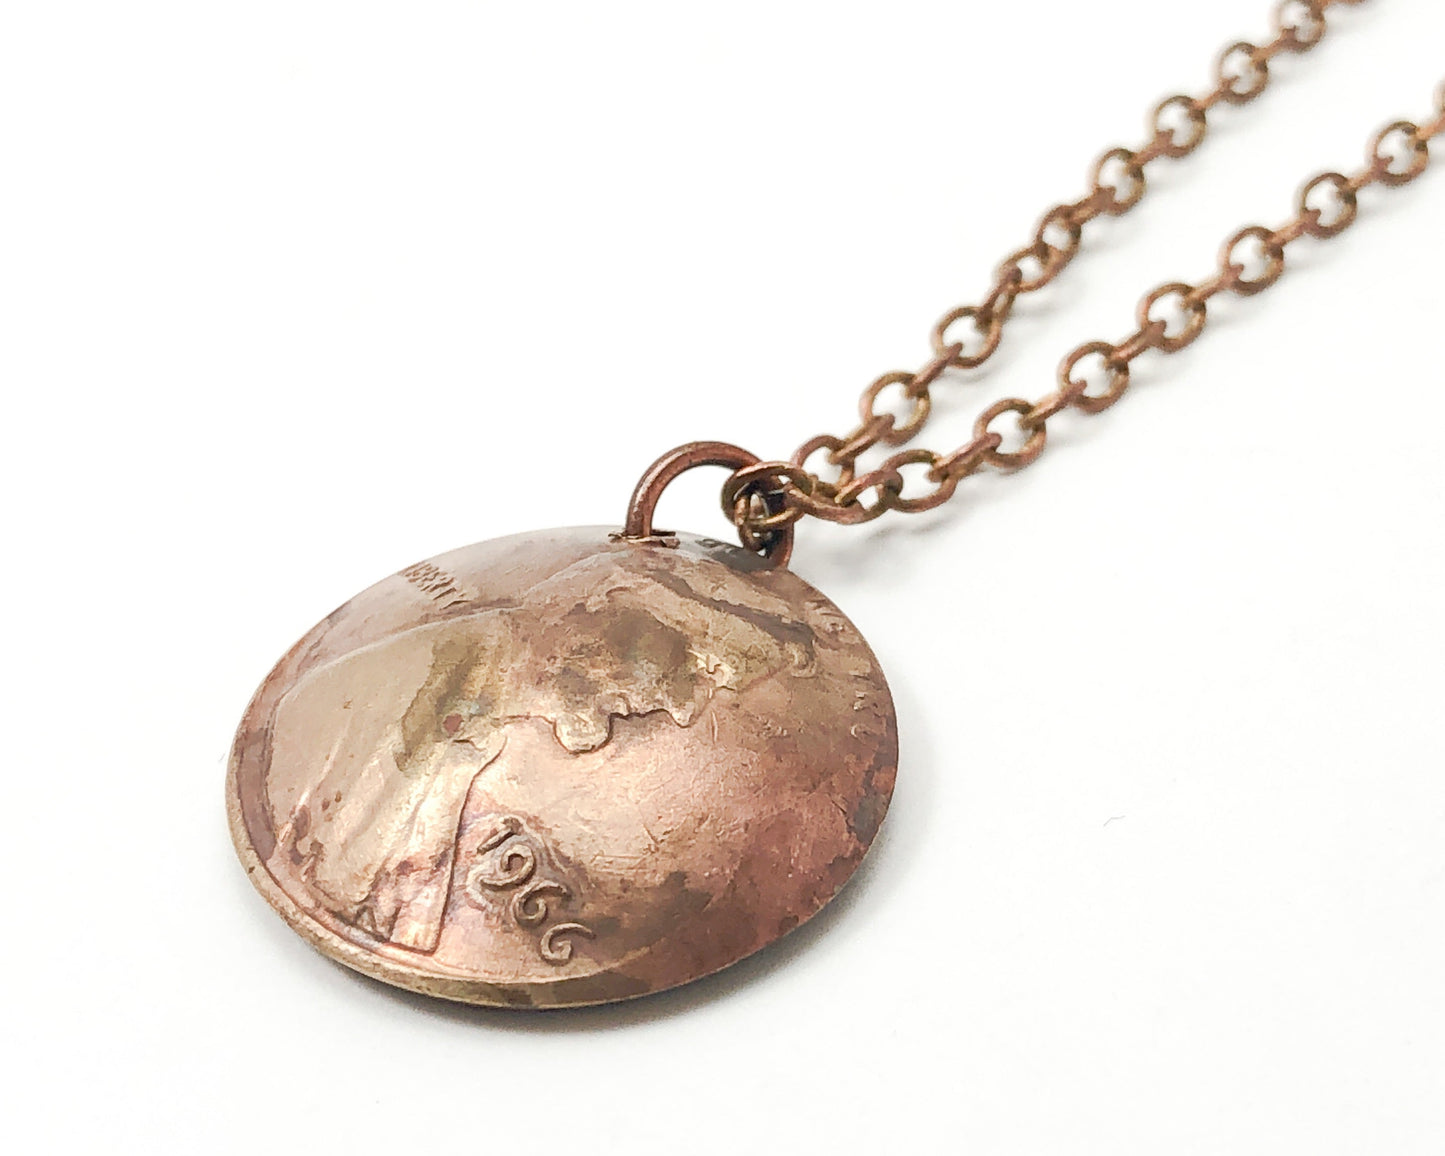 Snow Enameled penny pendant necklace [ready to ship]